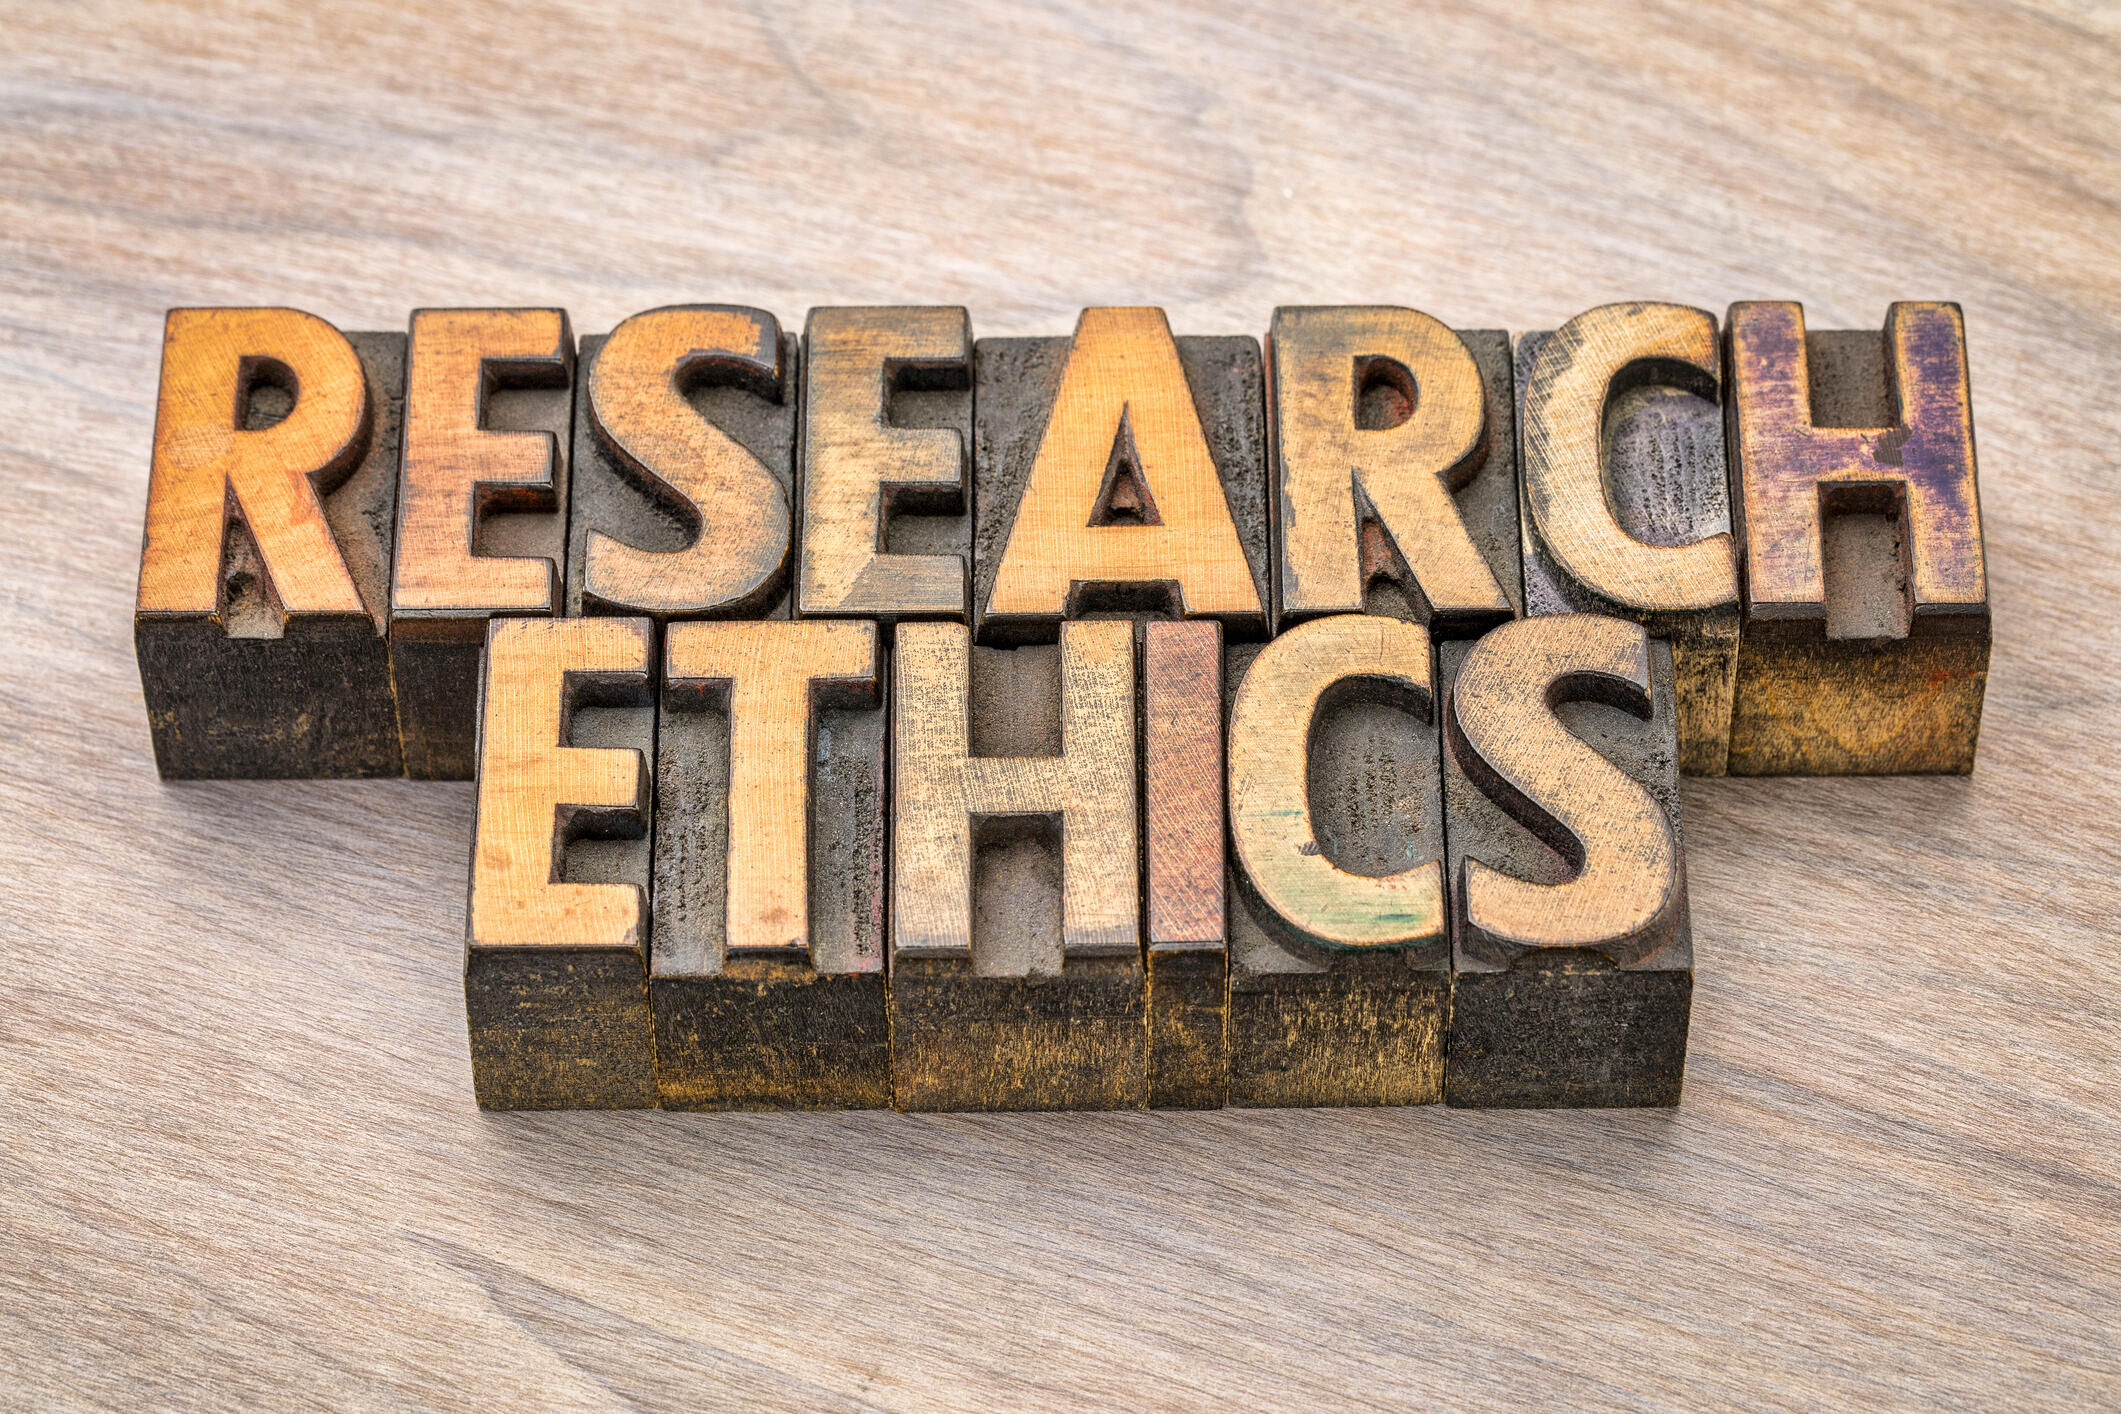 survey and behavioural research ethics committee cuhk